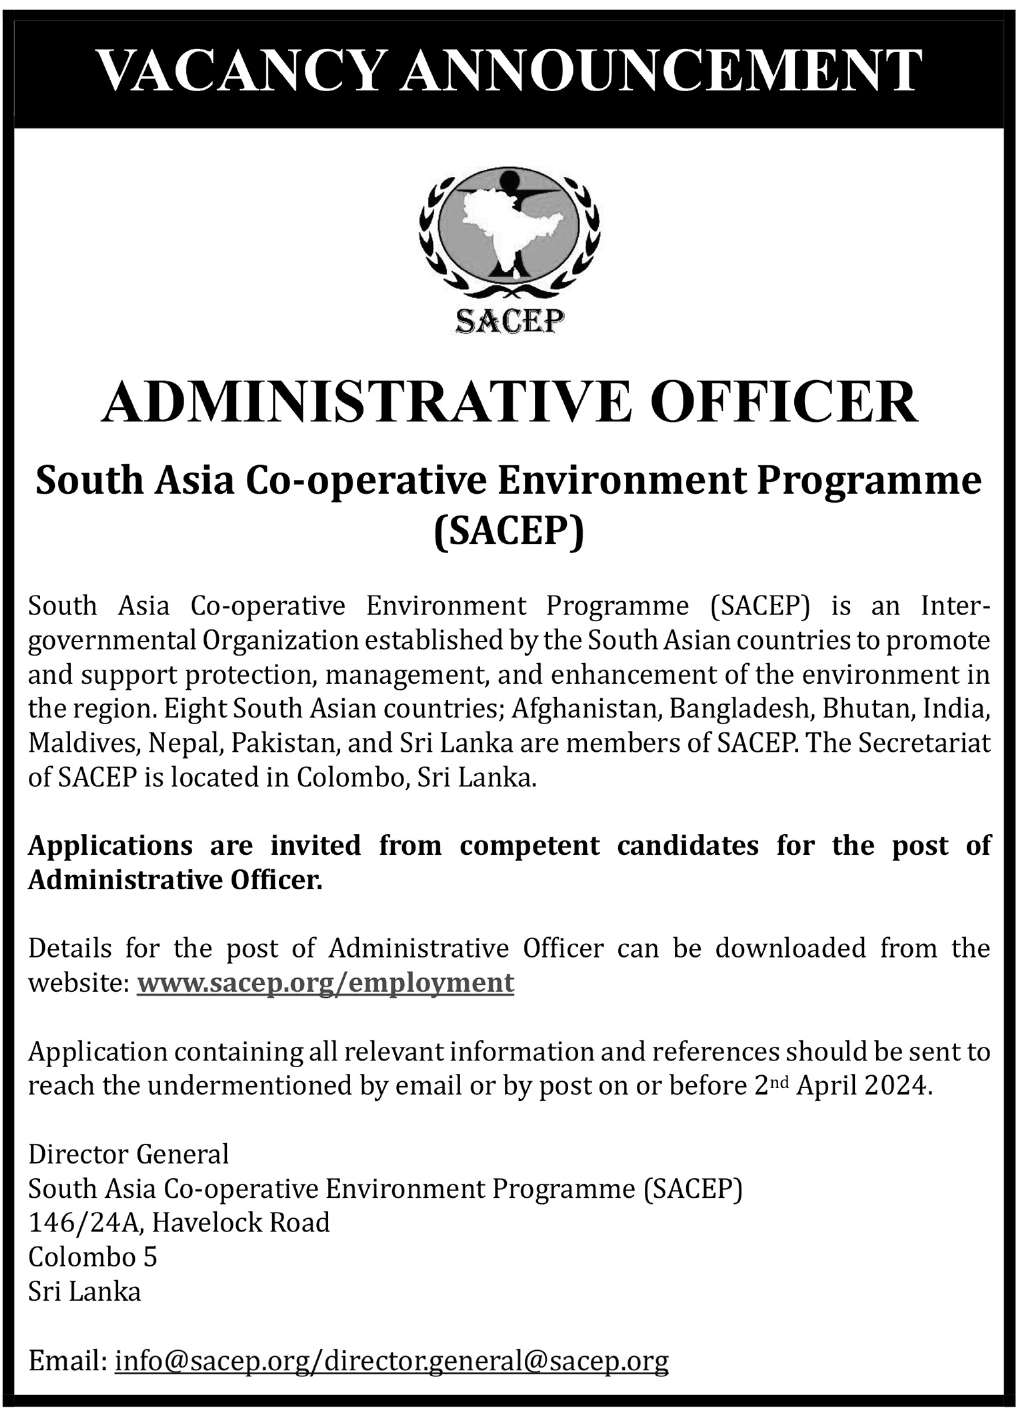 Administrative officer - South Asia co-operative environment programme